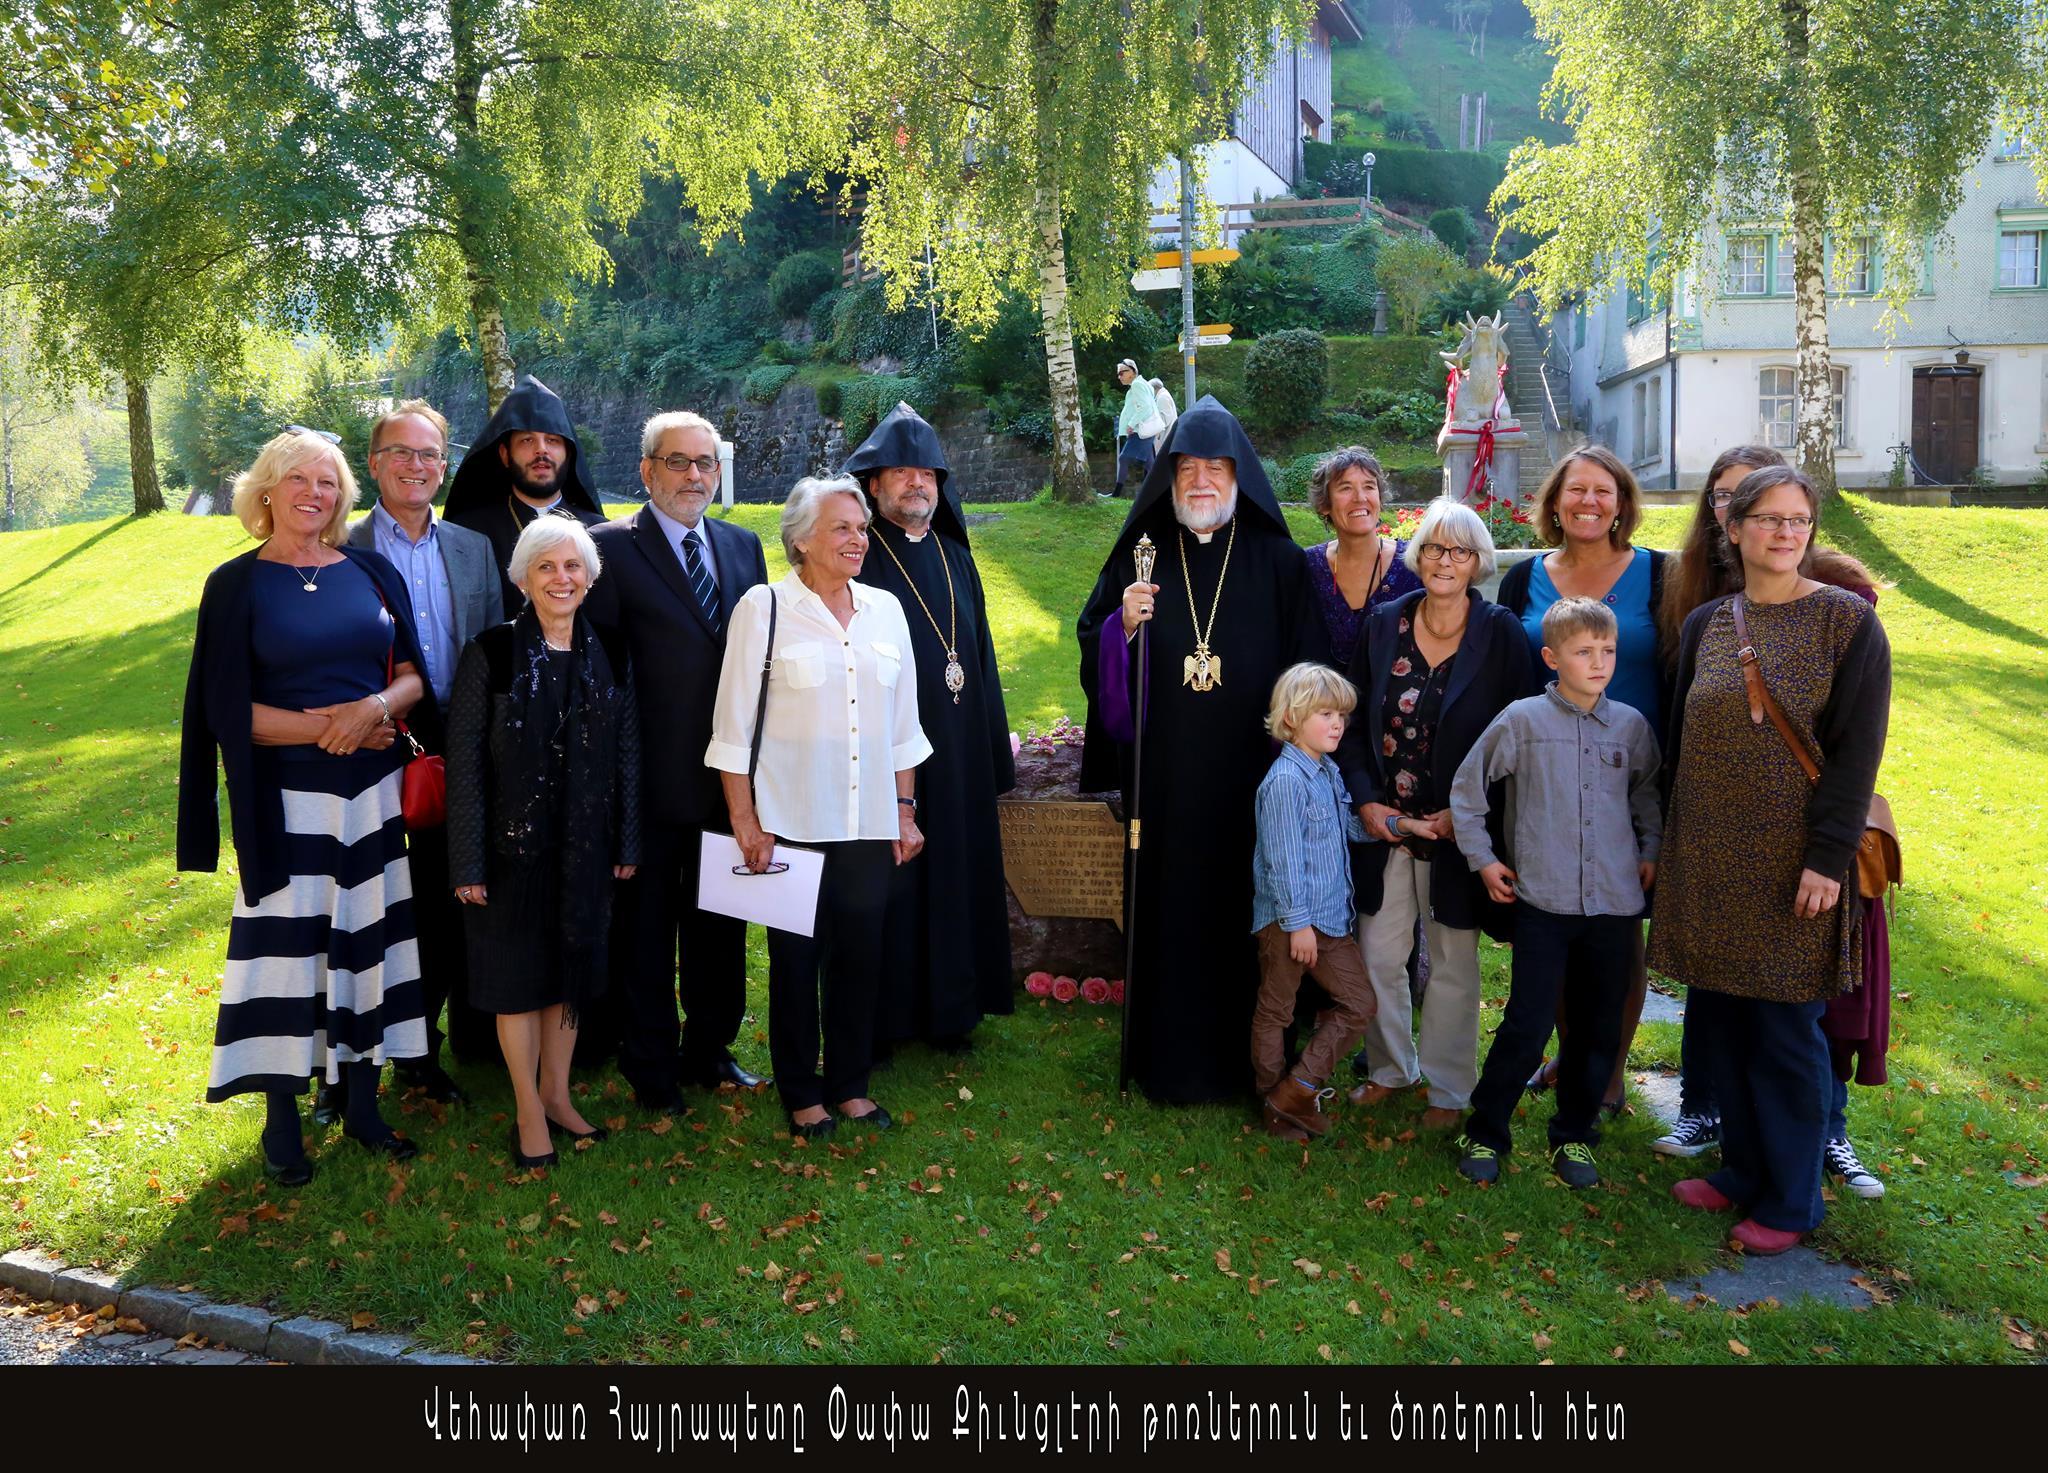 The Life of Papa Künzler was the expression of power of love in action, Concluded His Holiness Aram I in Walzenhausen